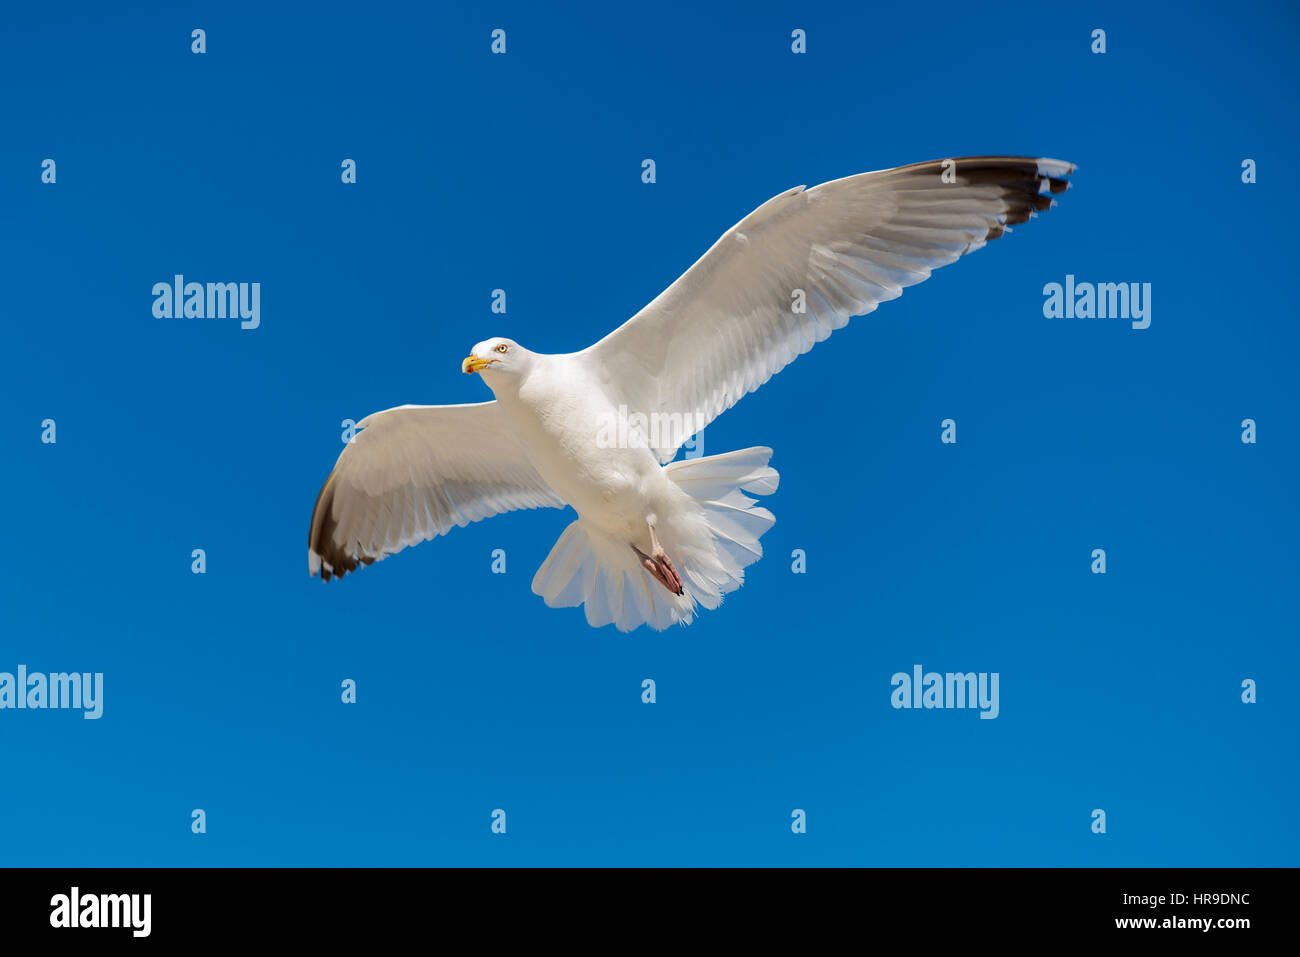 Single seagull flying against background of blue sky. Stock Photo